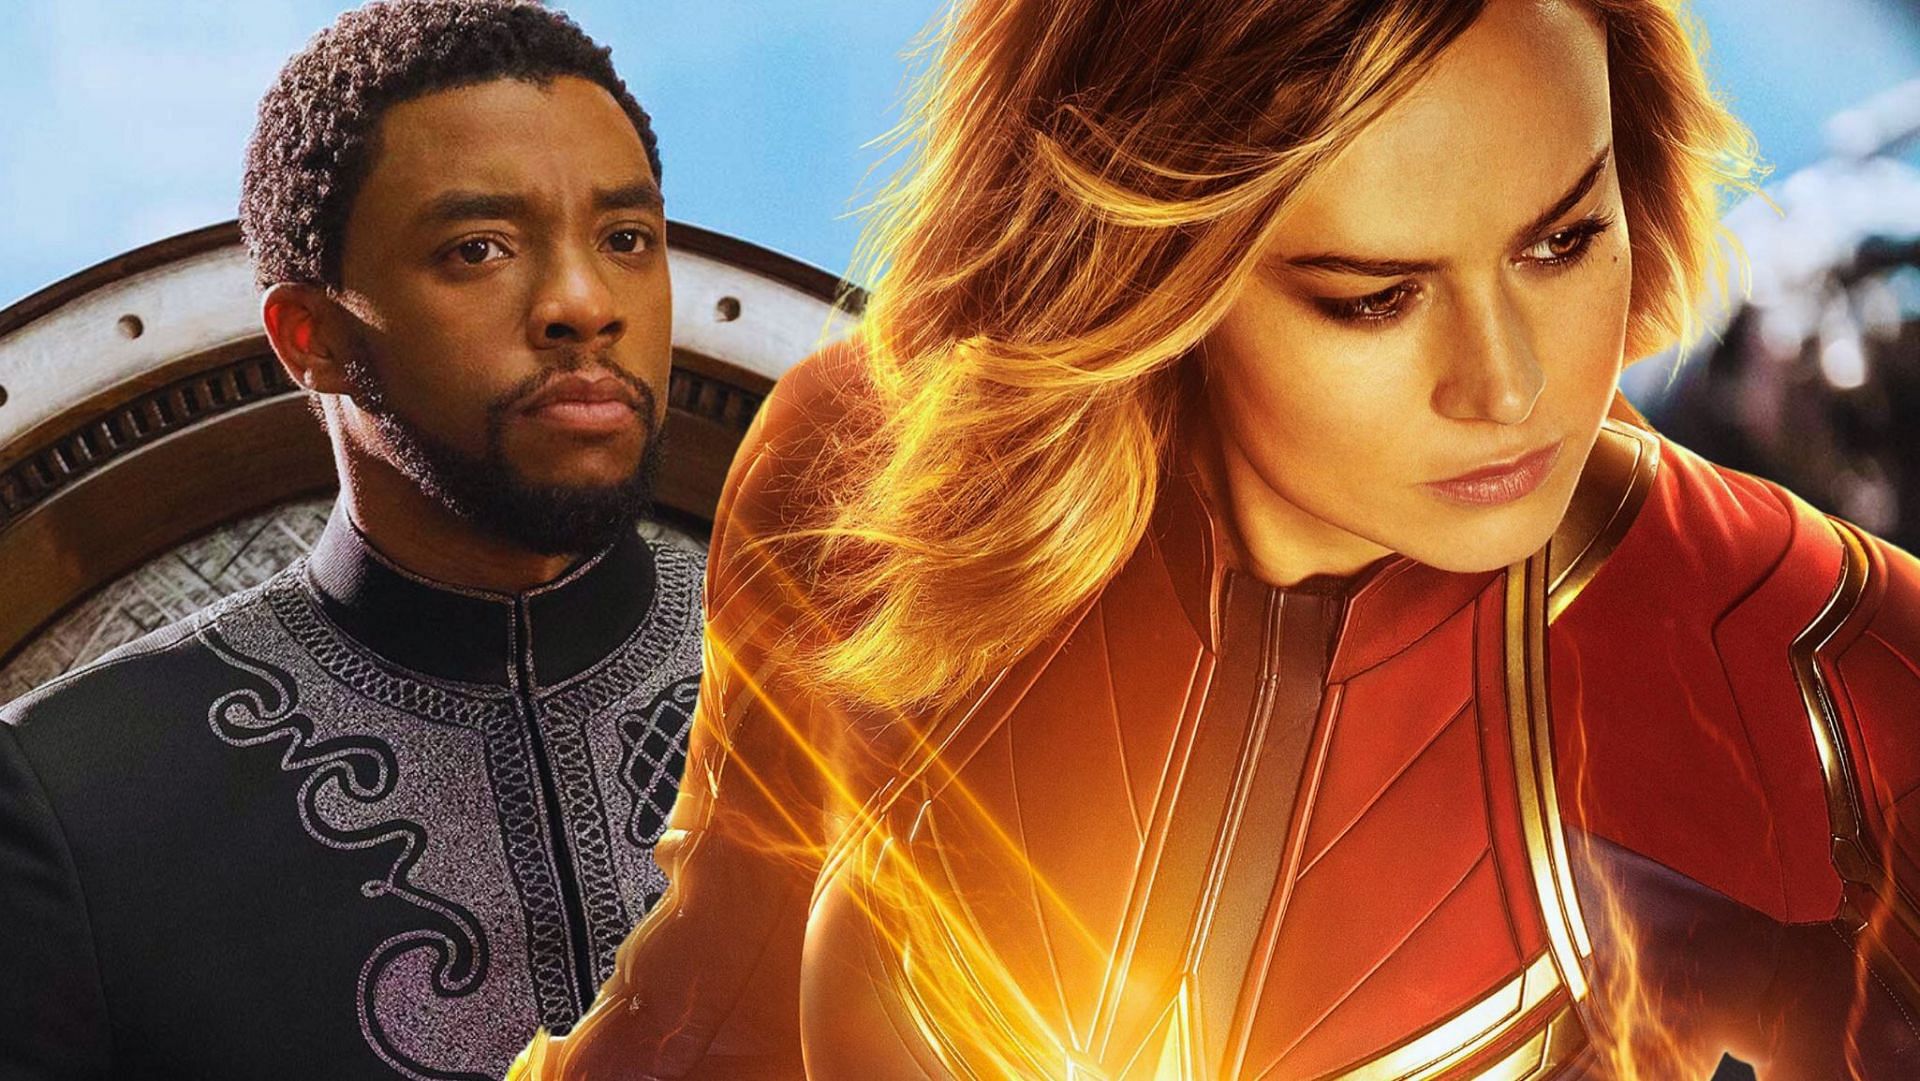 Black Panther and Captain Marvel broke barriers in Phase 3 of the MCU, introducing new heroes and bringing diversity to the franchise (Image via Sportskeeda)